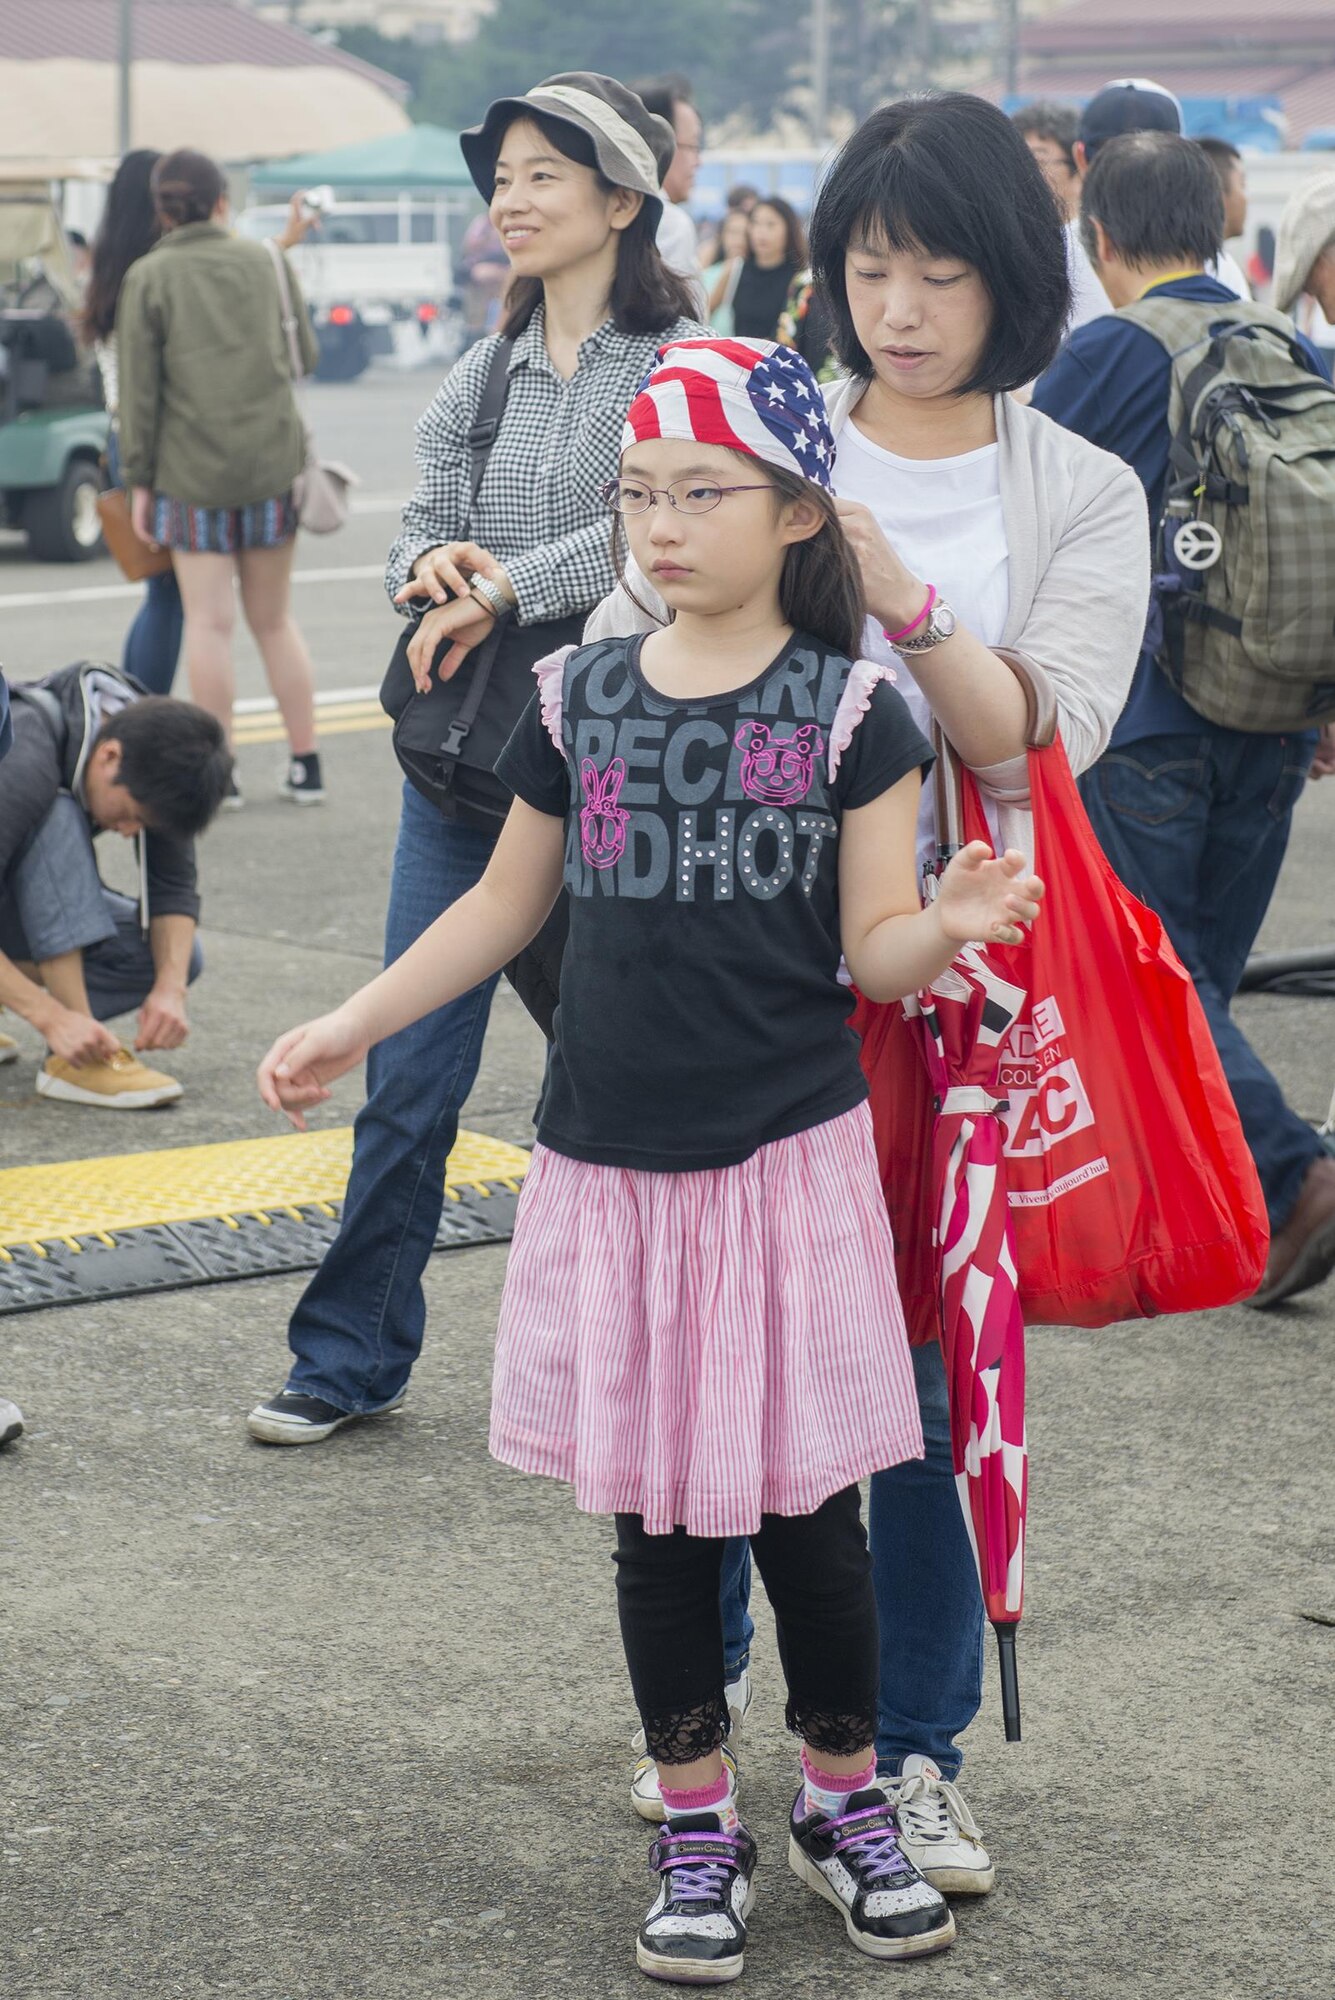 A young festivalgoer dons a star spangled bandanna at the 2016 Friendship Festival at Yokota Air Base, Japan, Sept. 18, 2016. The festival was an opportunity for visitors to experience American culture, while strengthening the bonds between Yokota and the local communities. (U.S. Air Force photo by Senior Airman David C. Danford/Released)

